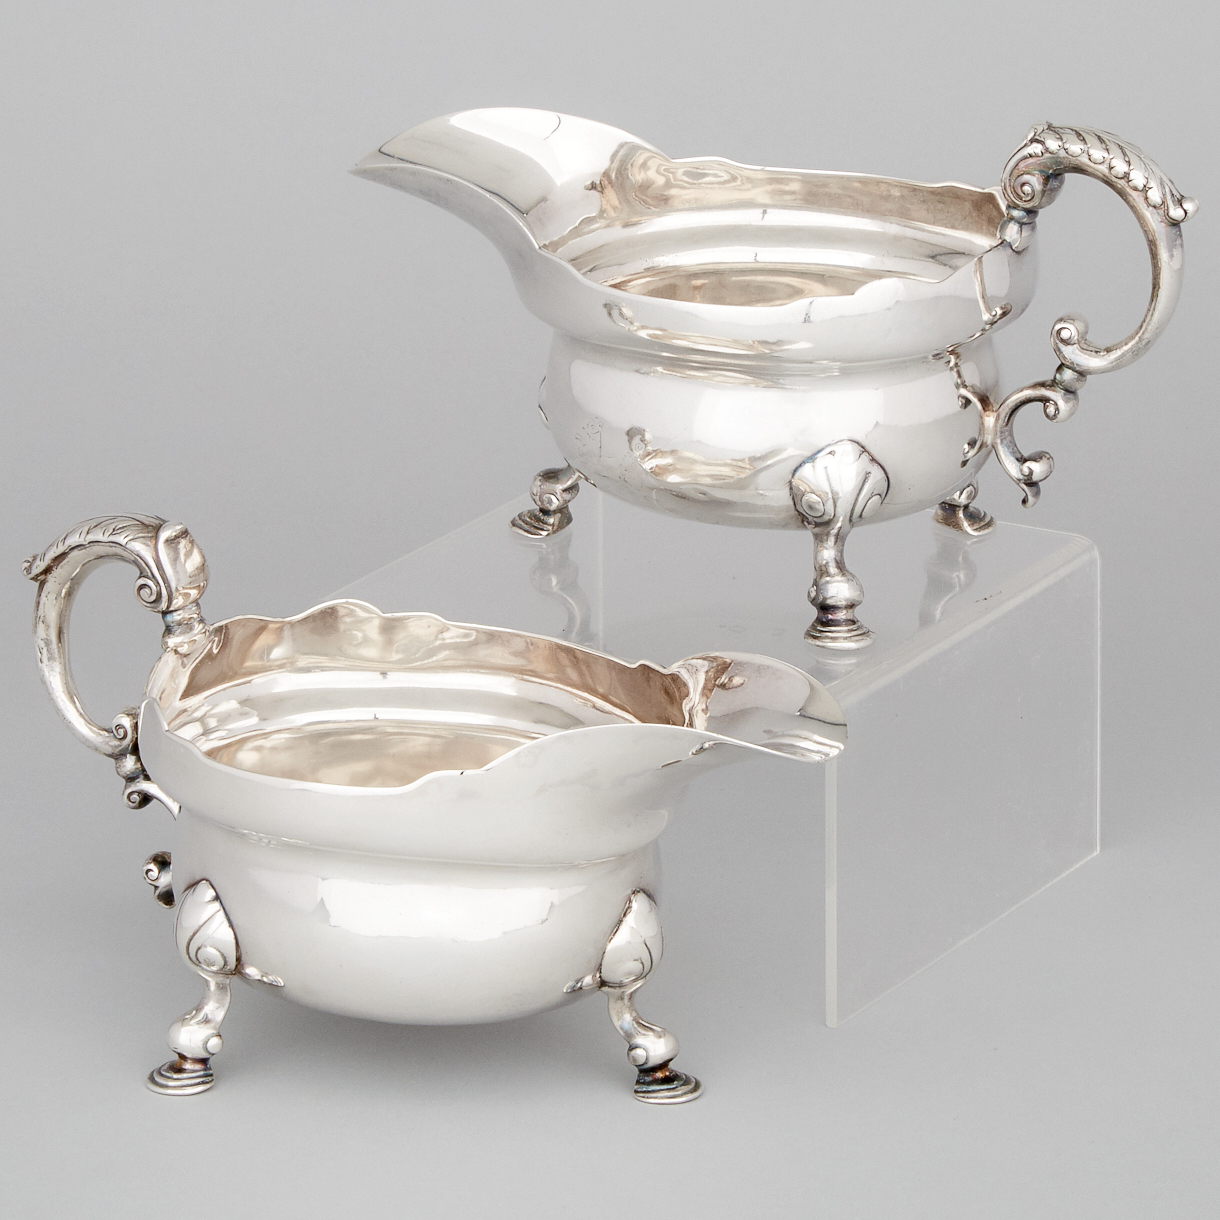 Assembled Pair of George II Silver Sauce Boats, Francis Nelme and Gabriel Sleath, London, 1735 and 1743